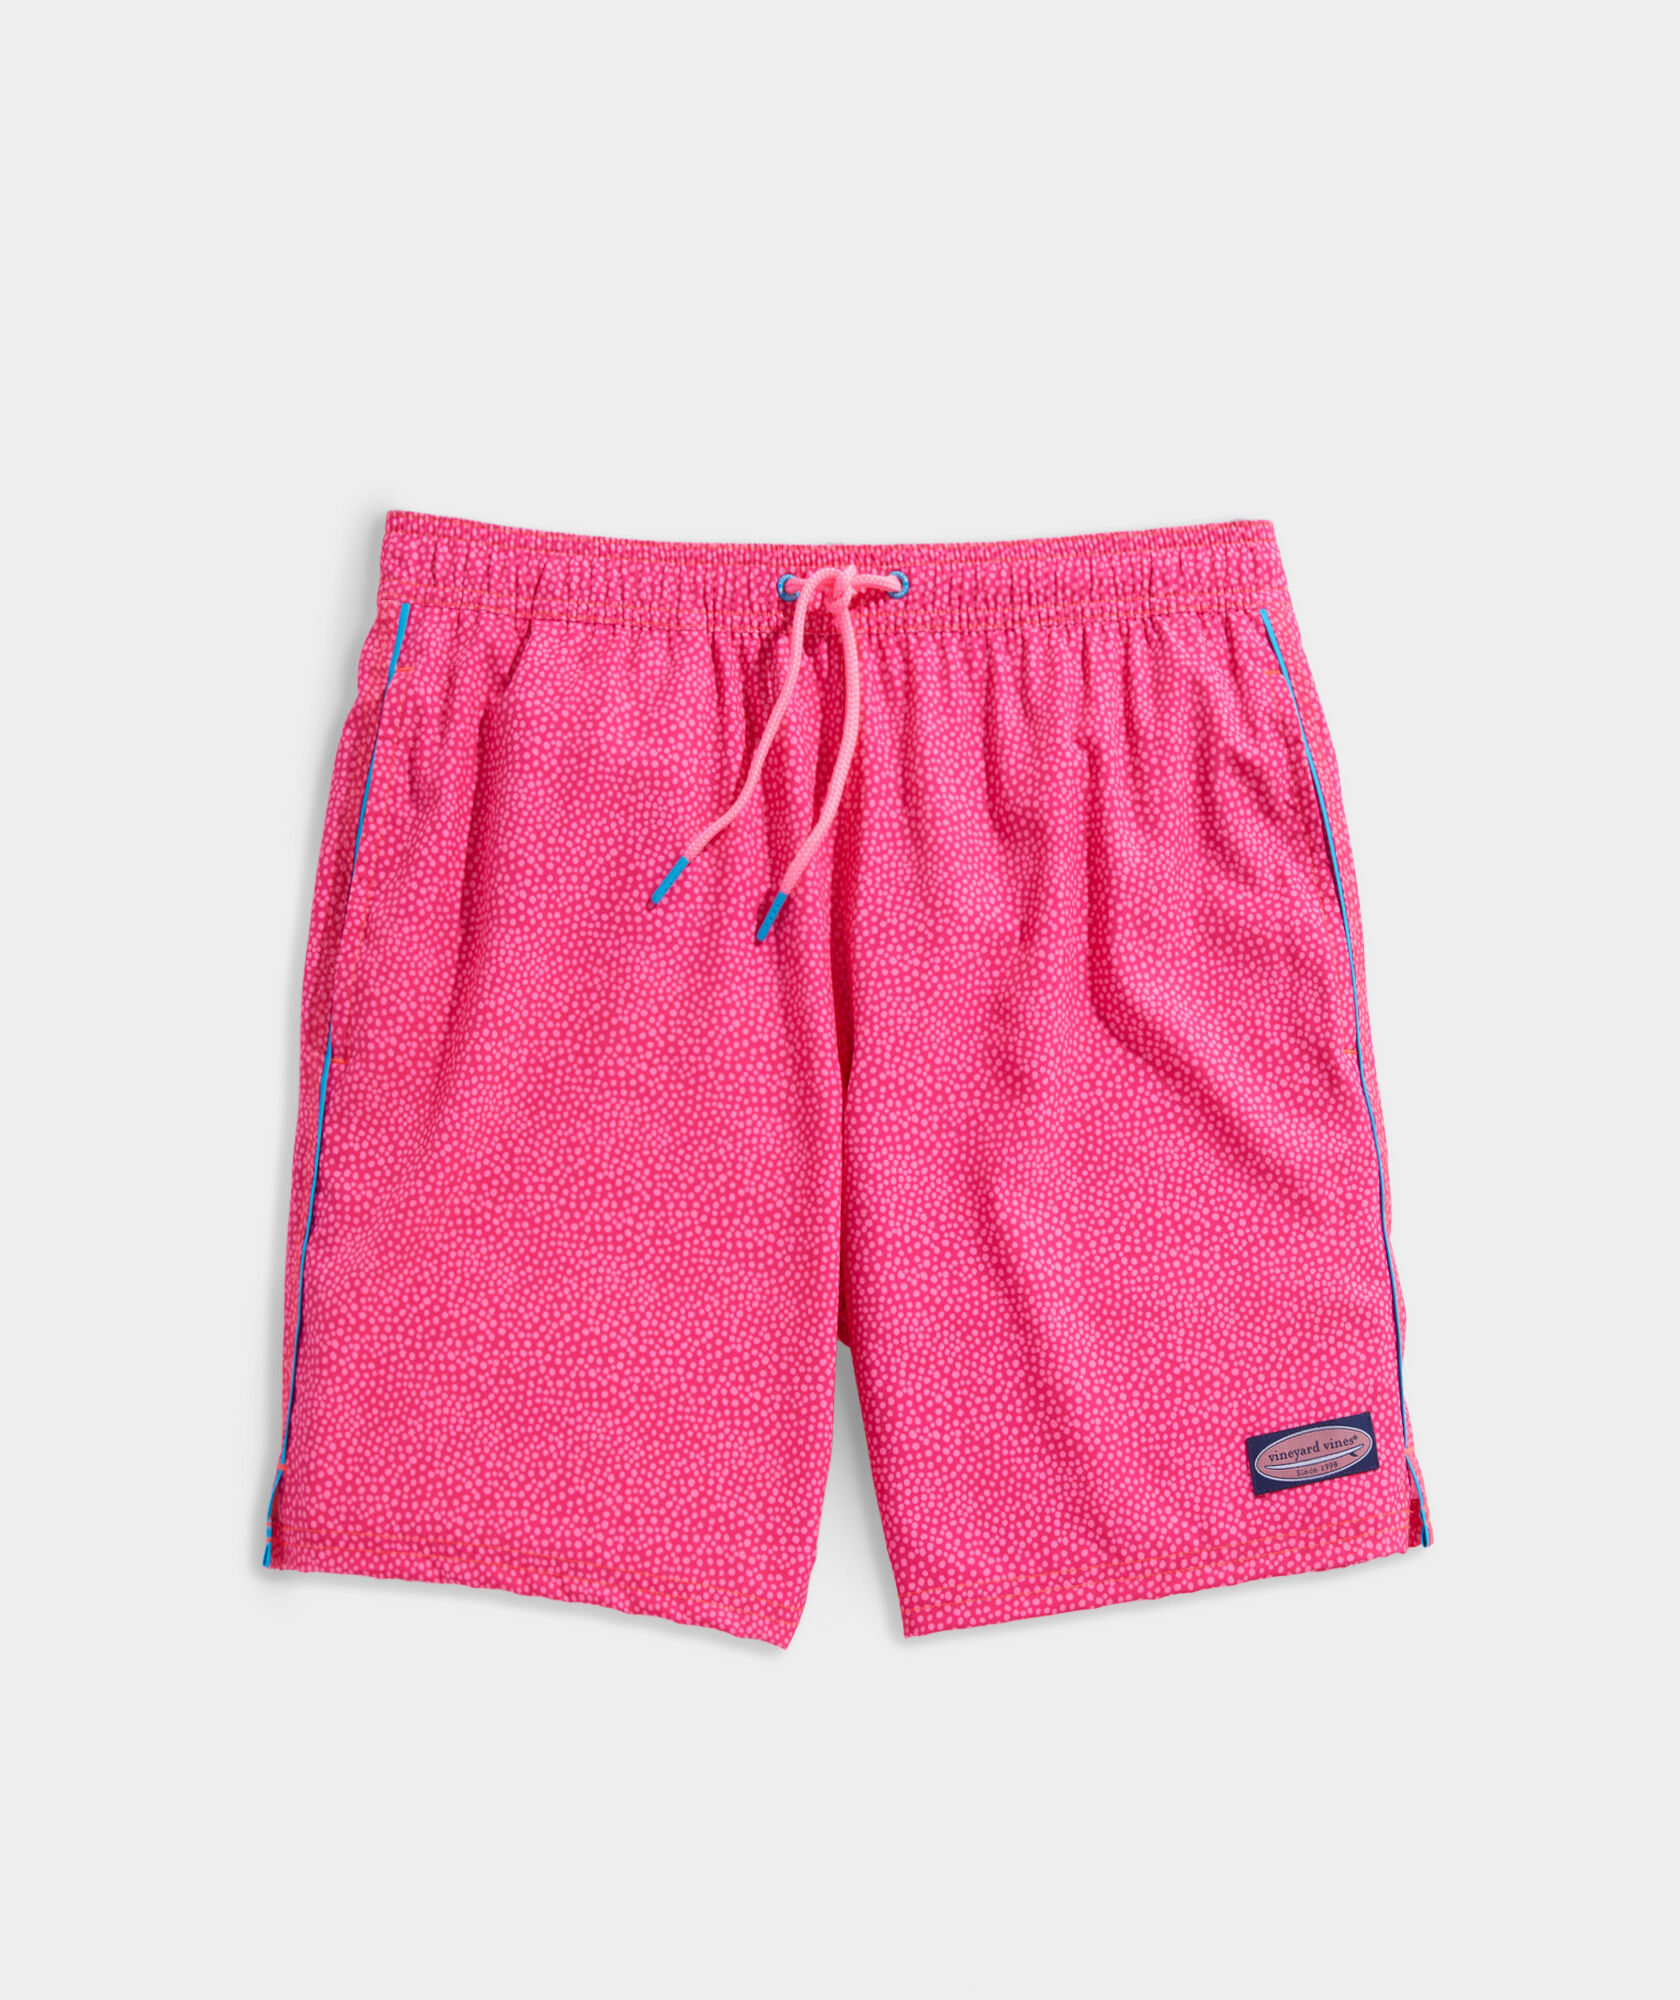 Men's Swim Trunks and Bathing Suits at vineyard vines